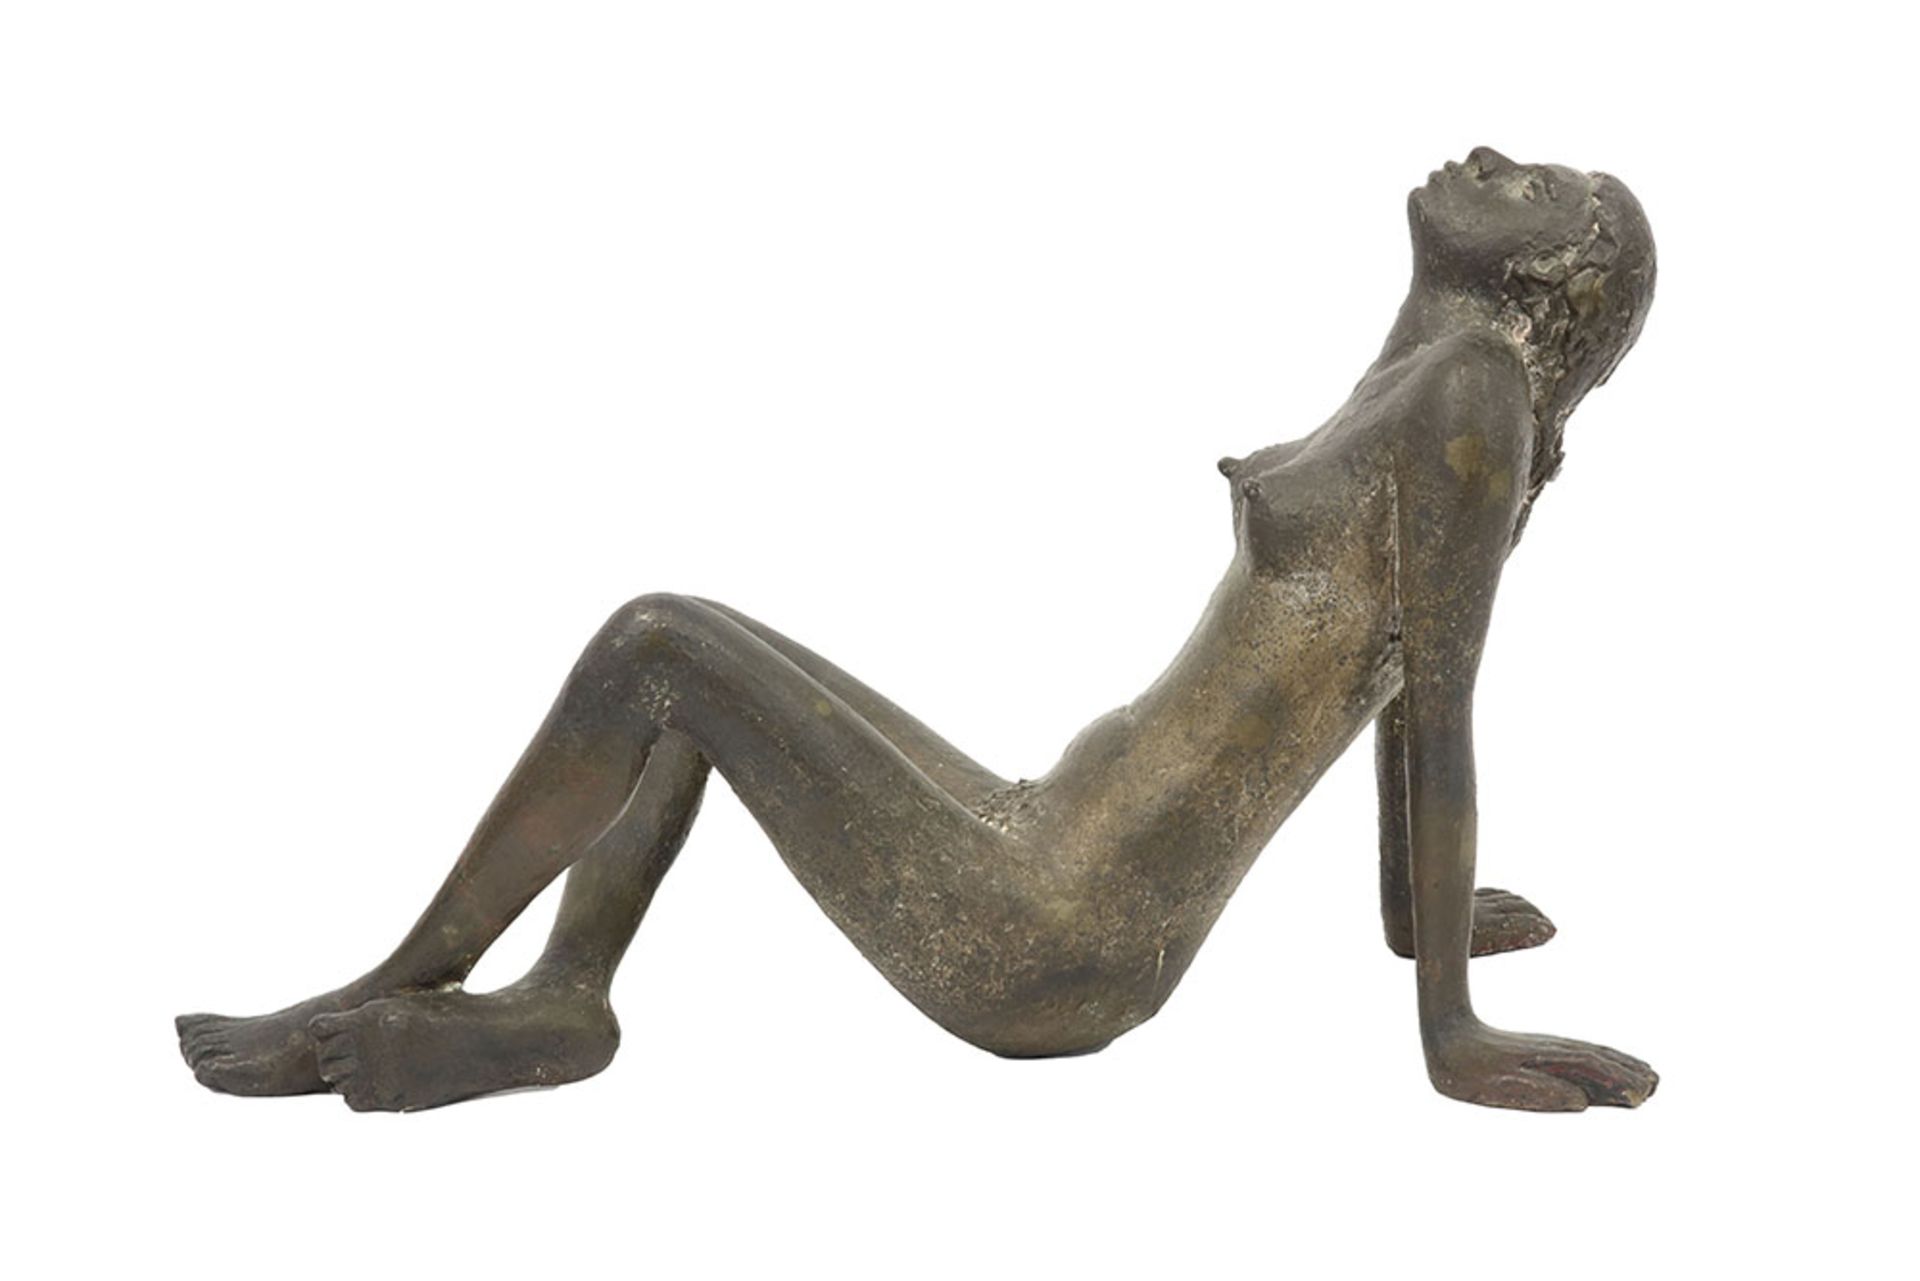 20th Cent. Belgian sculpture in bronze - signed Georges Grard || GRARD GEORGES (1901 - 1984) - Image 3 of 4